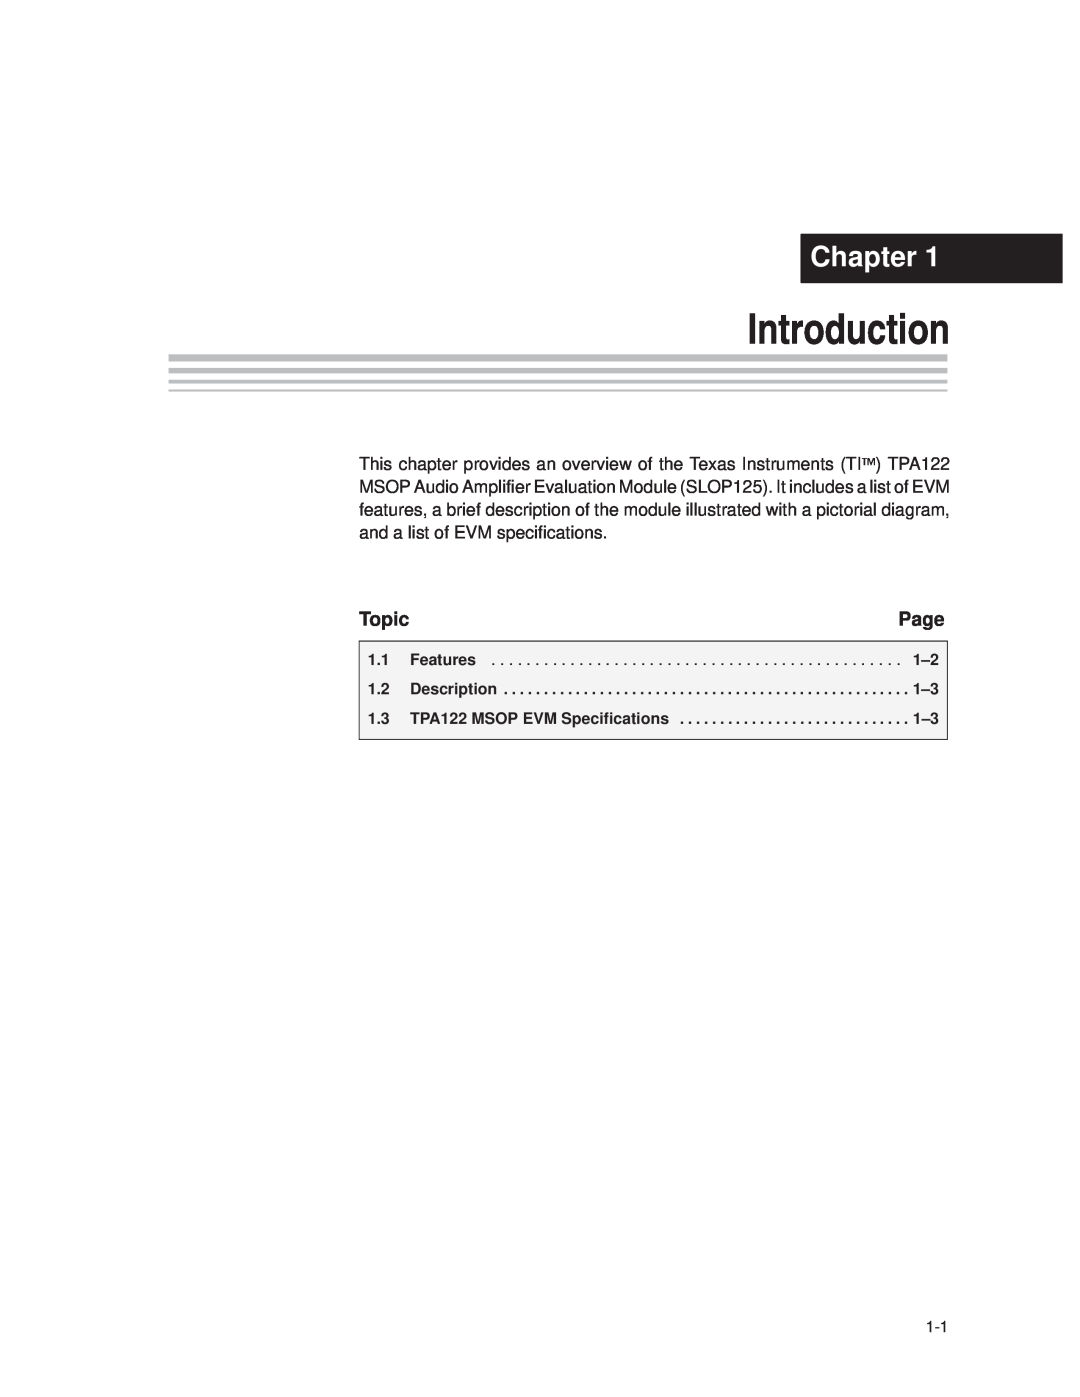 Texas Instruments SLOU025 manual Introduction, Chapter, Page, Topic 